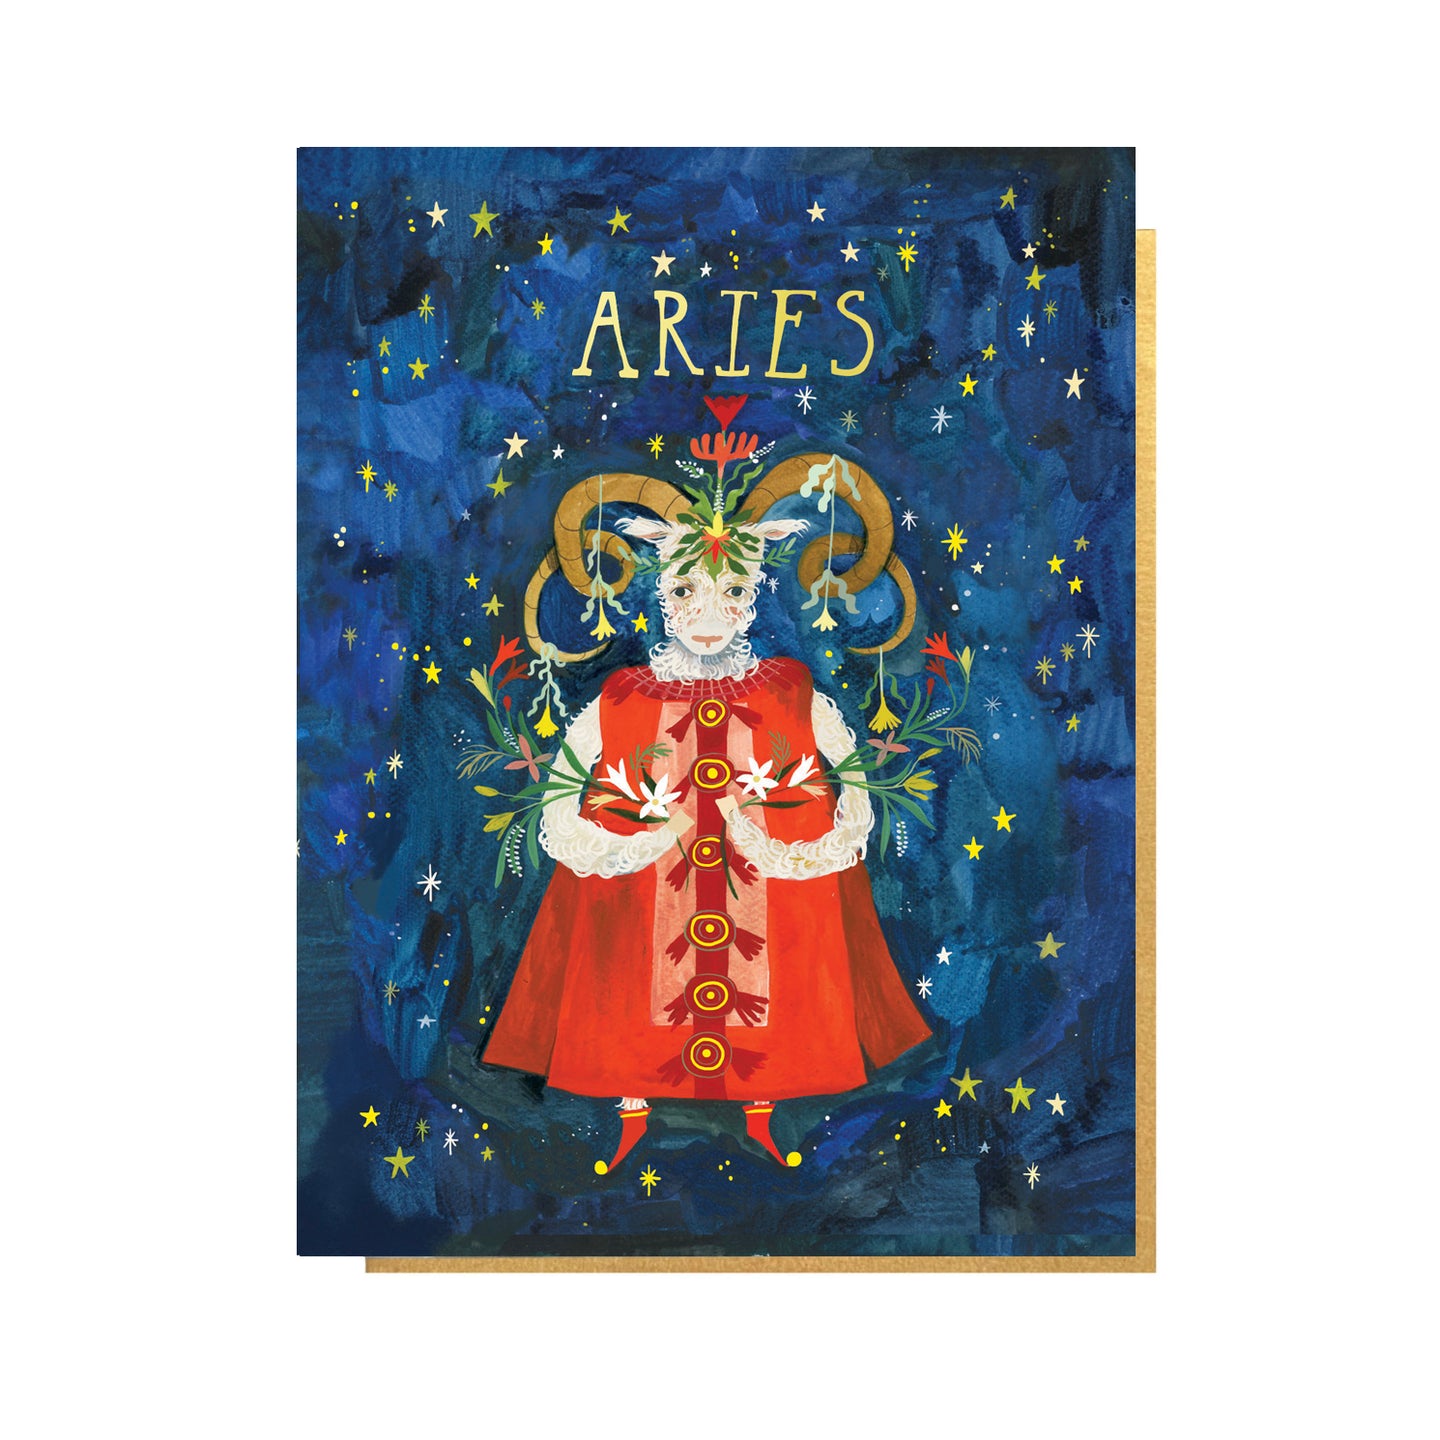 ASTROLOGY SIGN ARIES